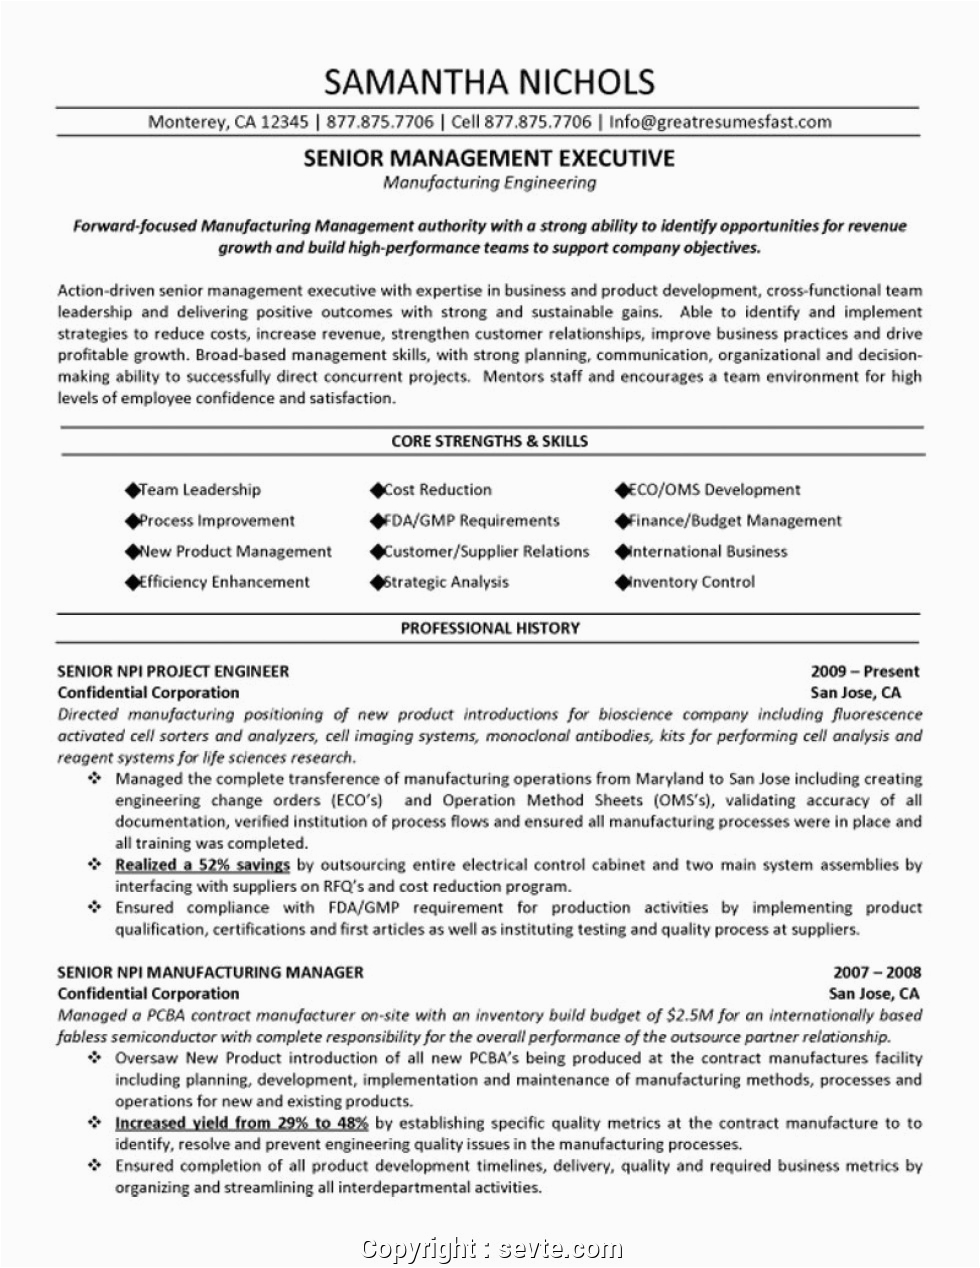 Sample Resume Objective Statements for Project Manager Professional Senior Project Manager Resume Objective